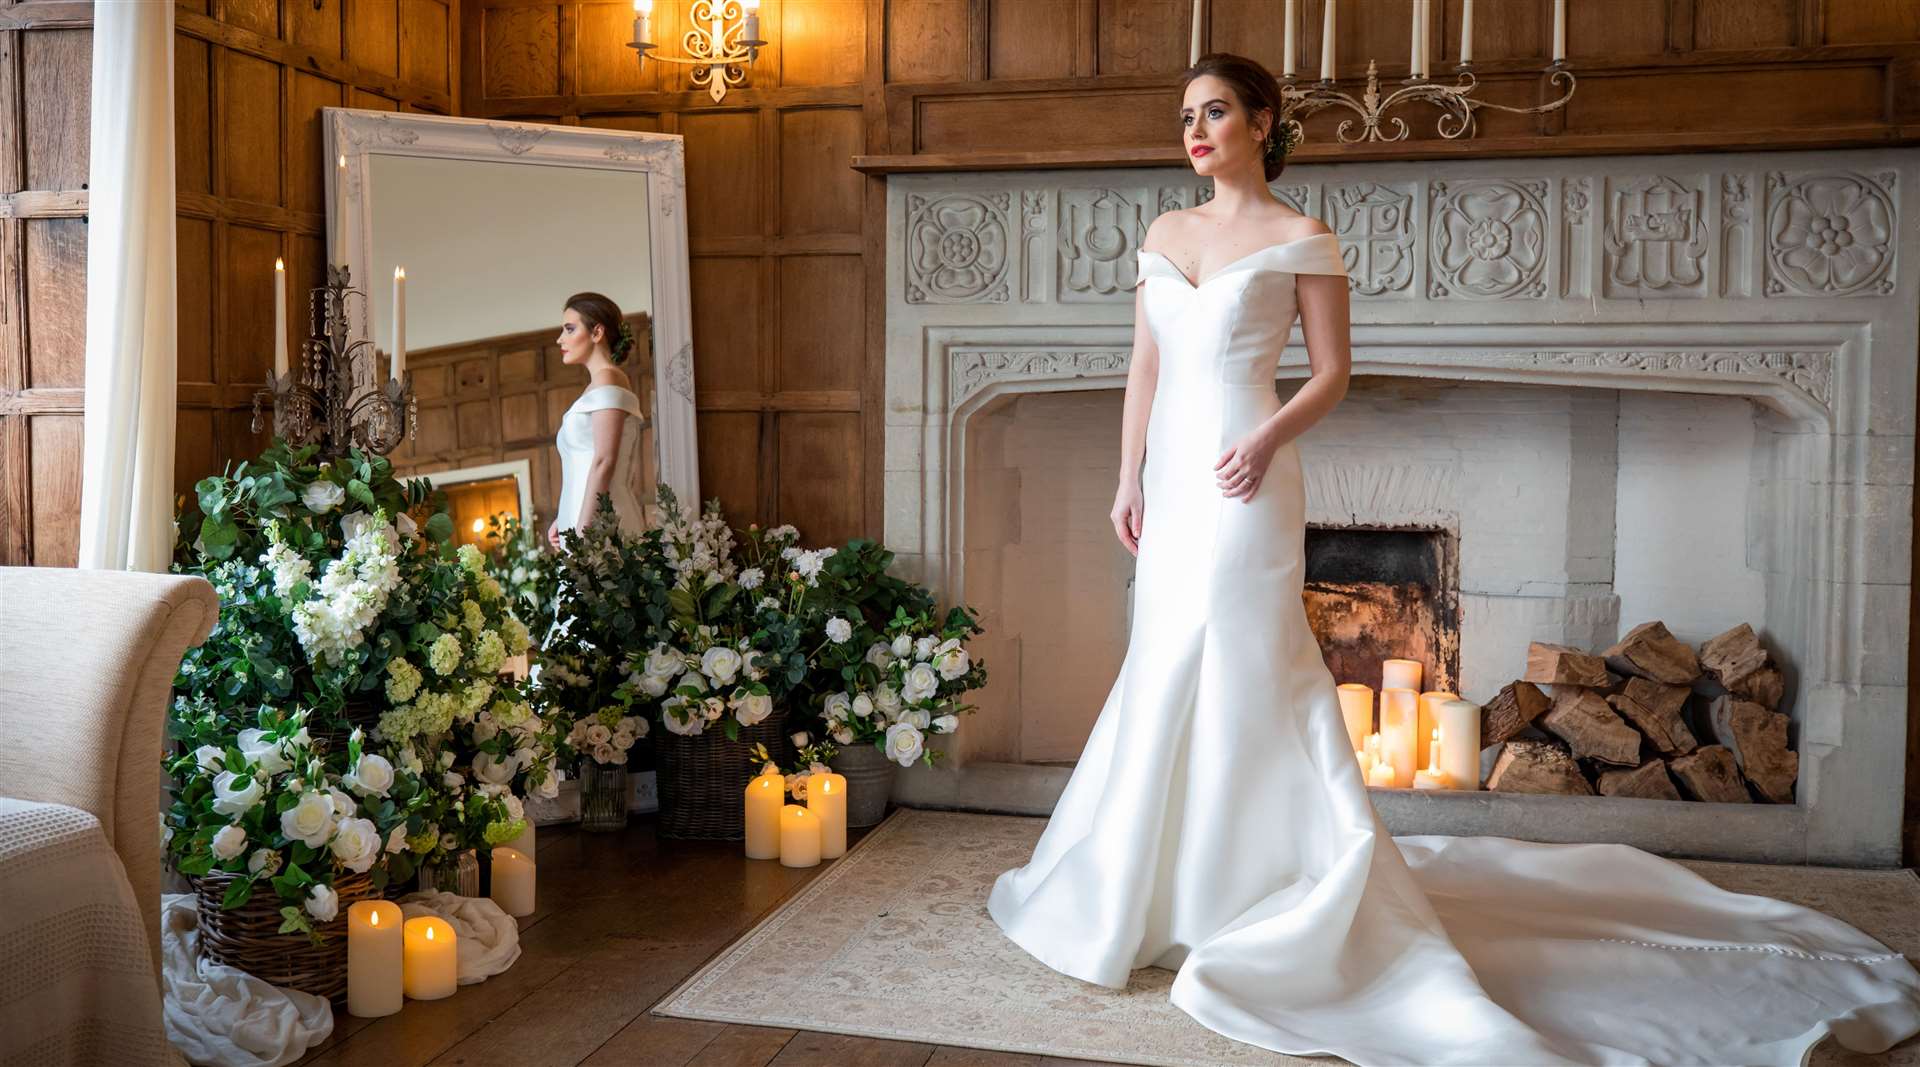 This year Lympne Castle expects to generate £1m in wedding revenues